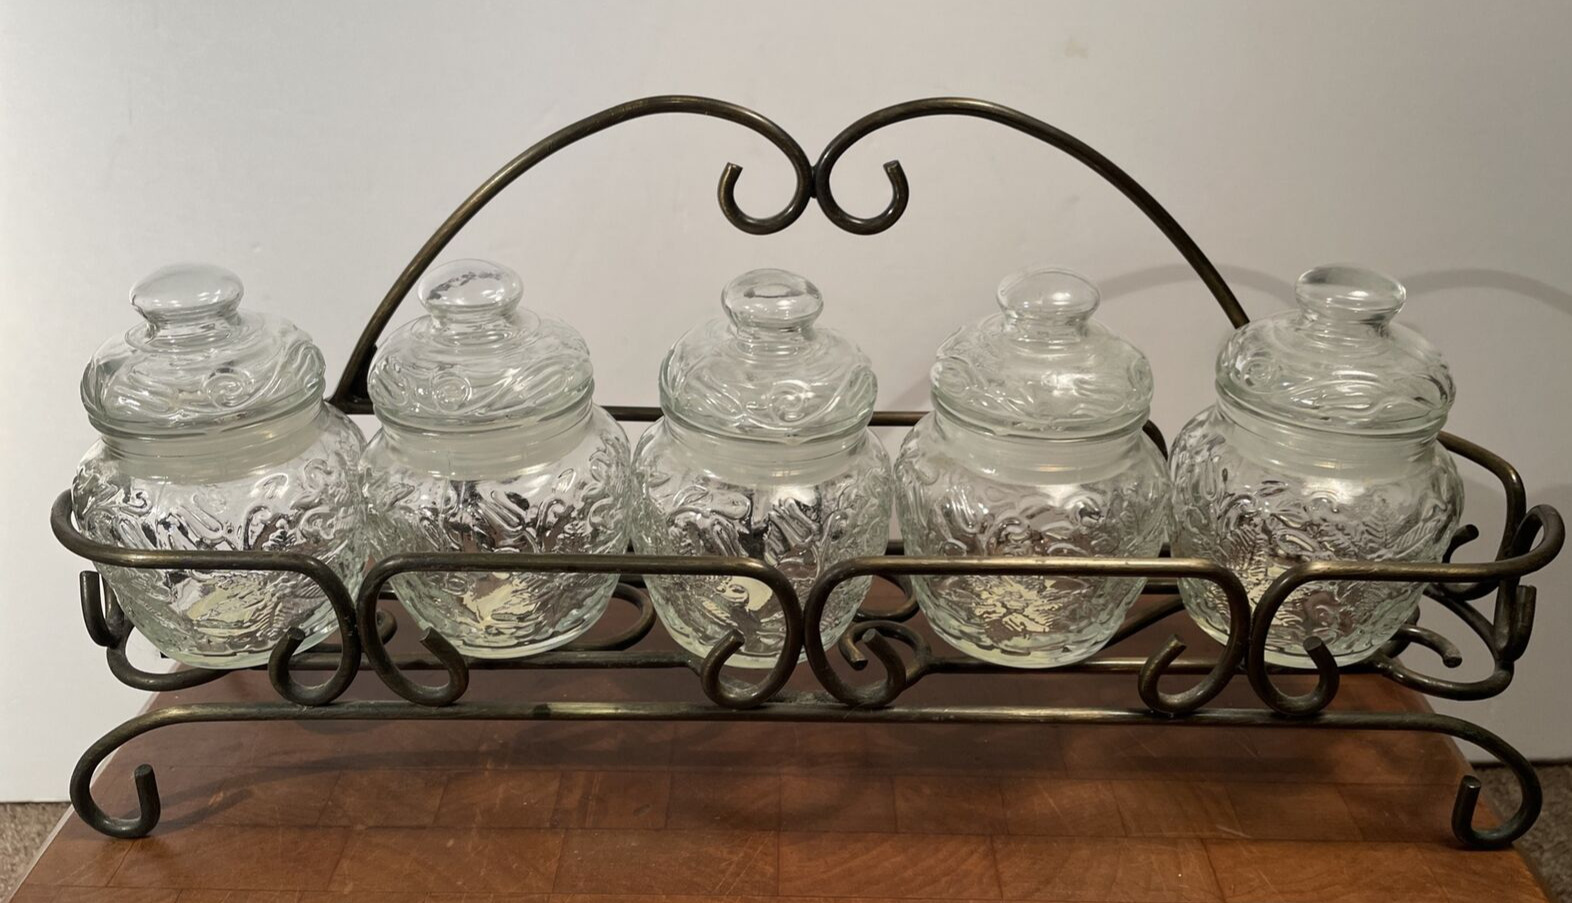 Princess House Fantasia Spice Rack Stand With 5 Spice Jars And Lids Crystal